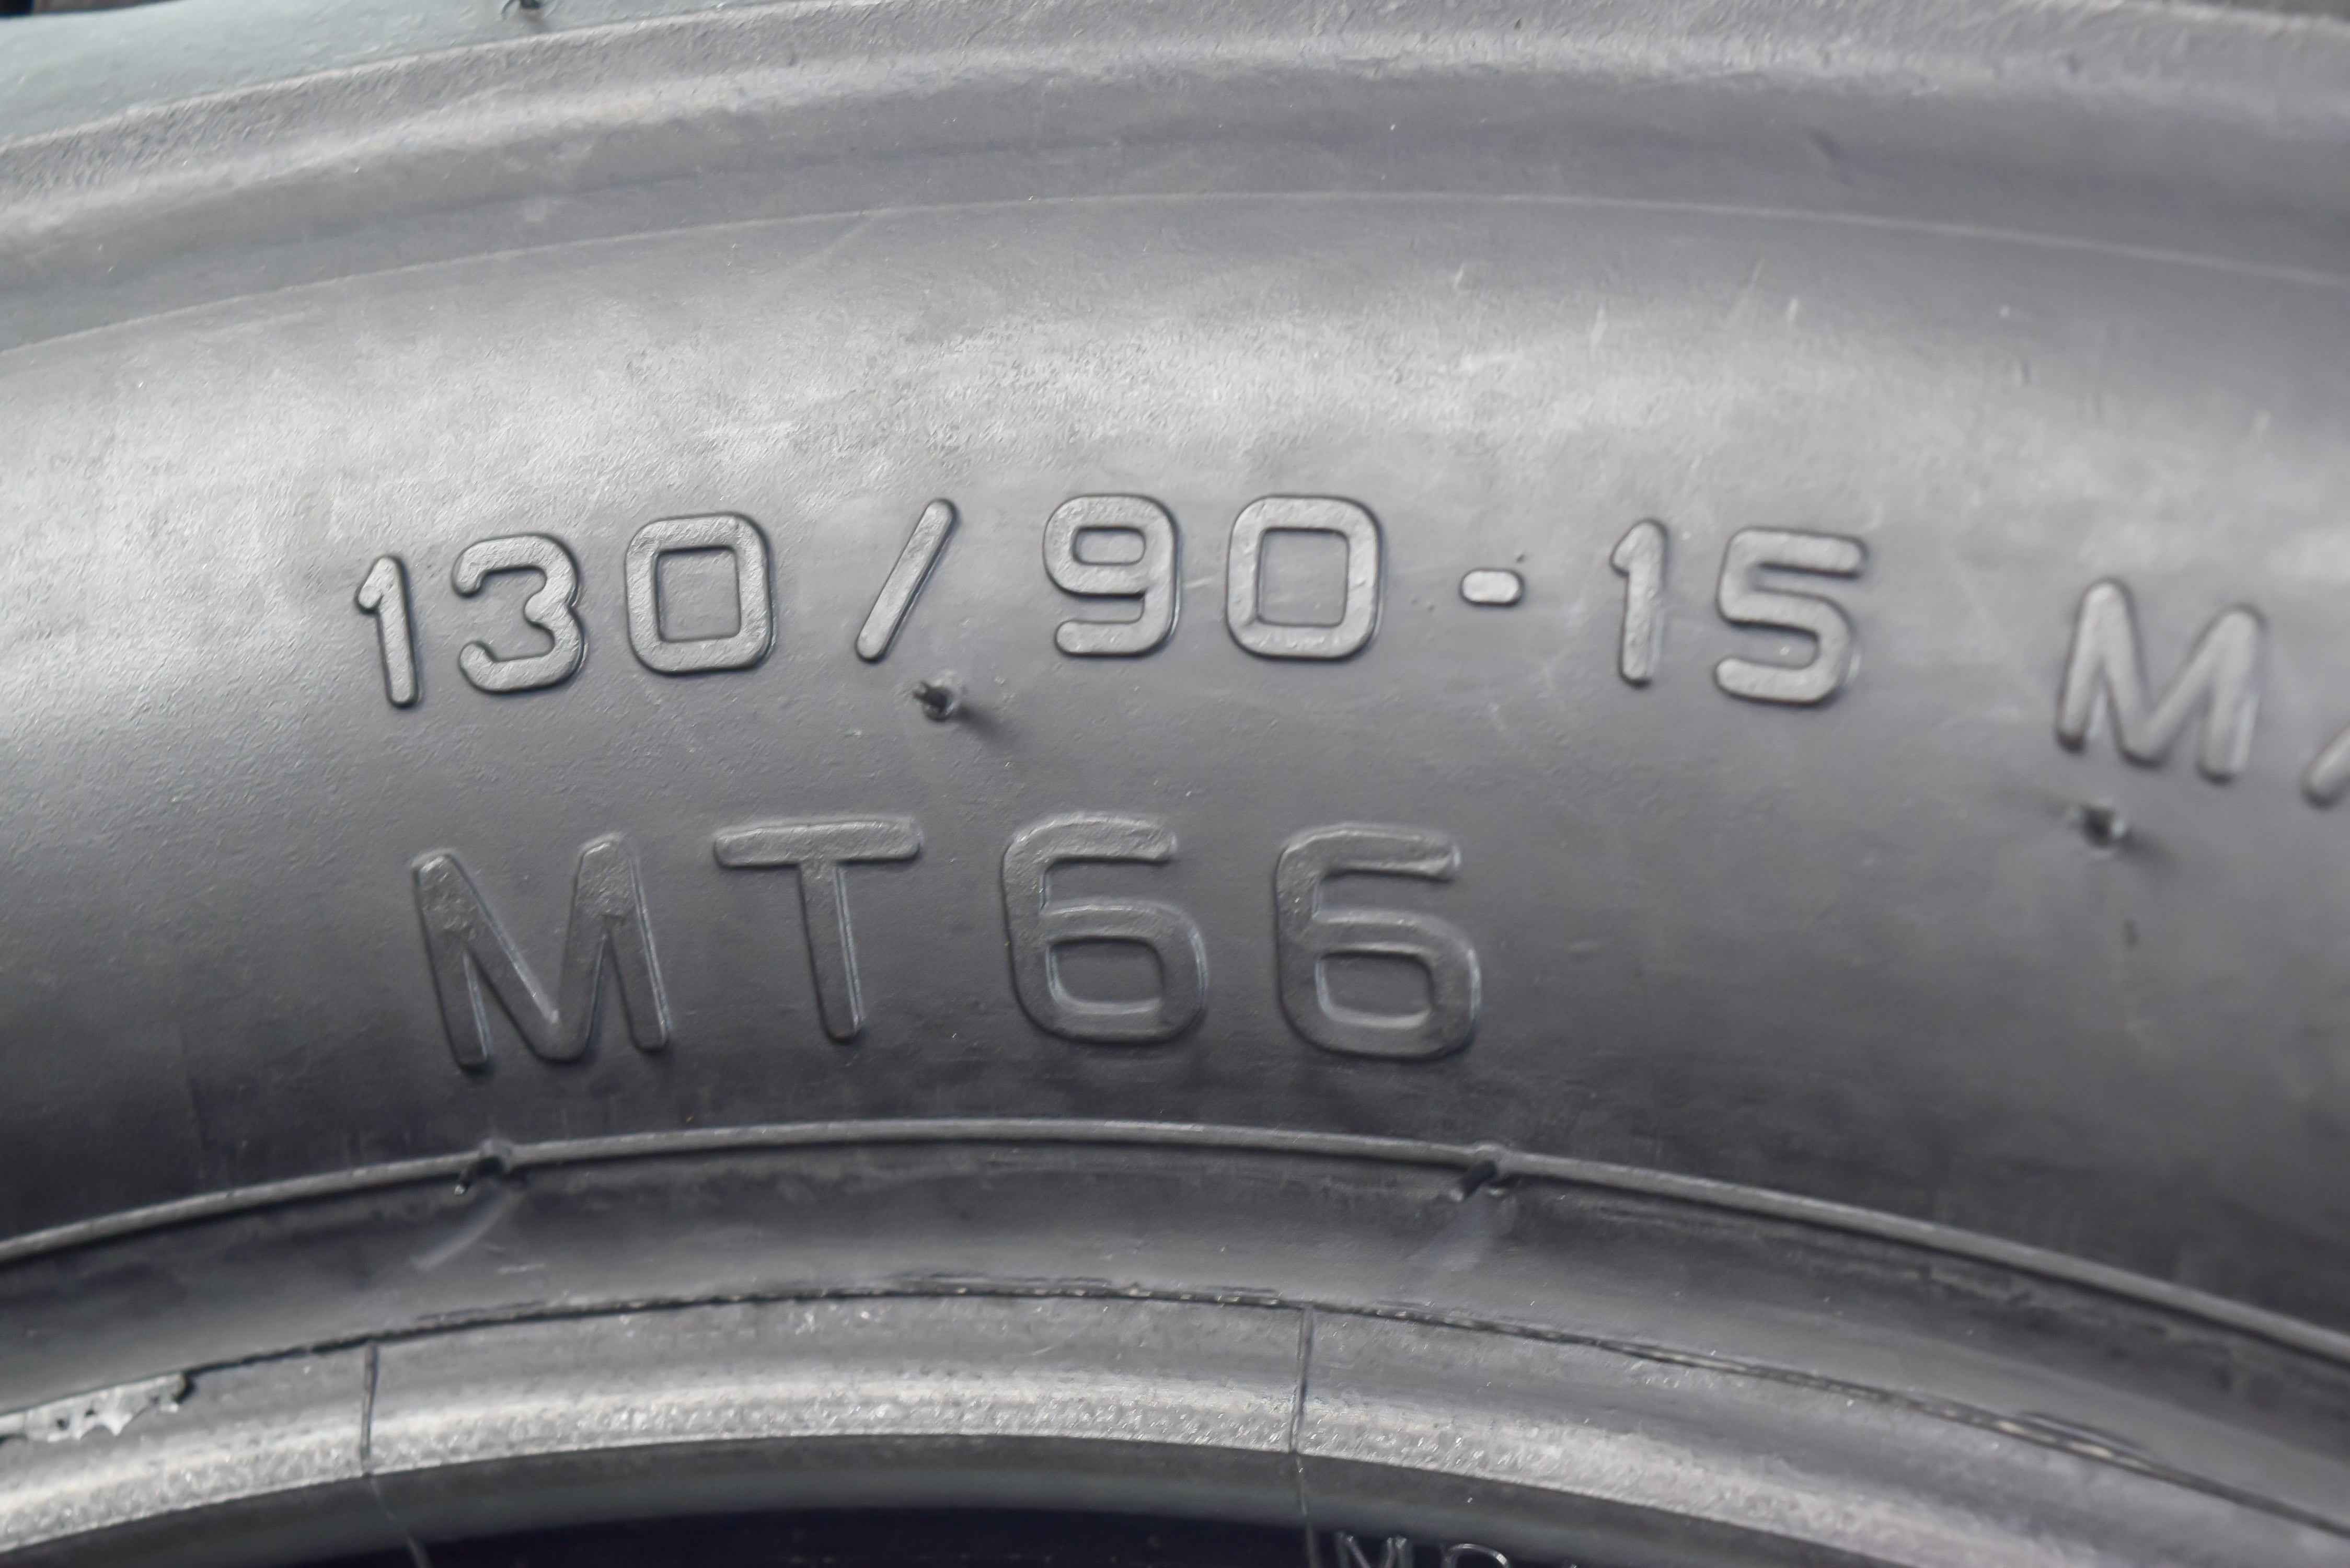 Pirelli-MT-66-Route-1003300-130-90-15-M-C-66S-Rear-Motorcycle-Cruiser-Tire-image-3